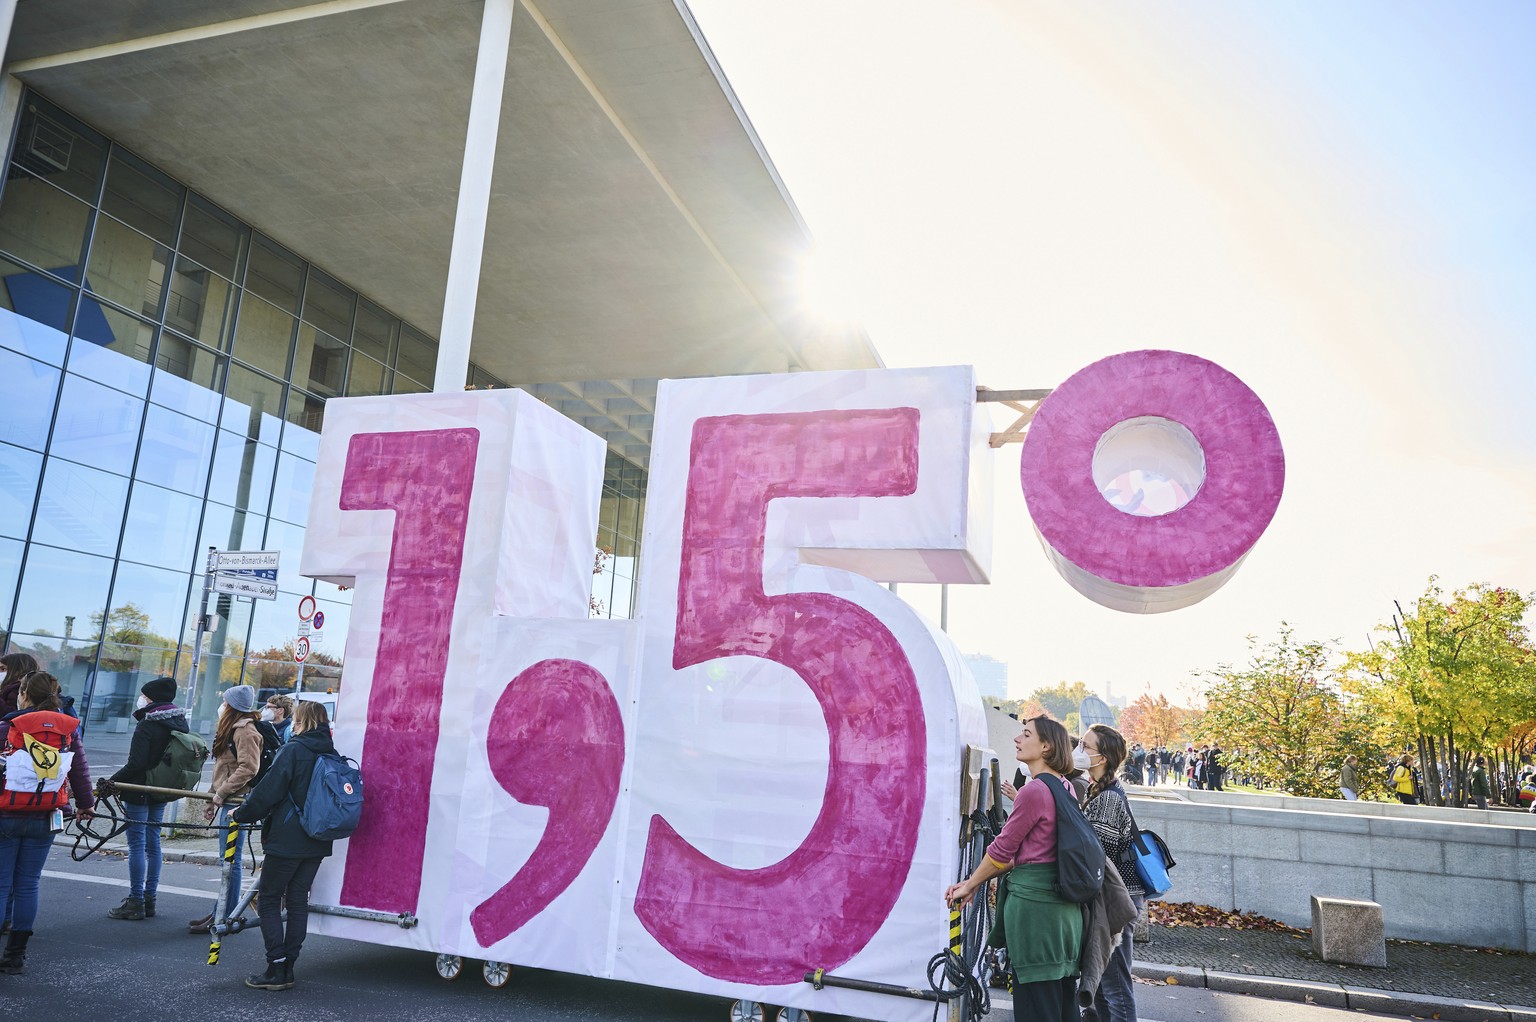 This Oct. 24, 2021 taken photo shows demonstrators from Extinction Rebellion push a self-made cart in the shape of the climate target &quot;1.5&quot; in Berlin, Germany. Officials say a target for ric ...